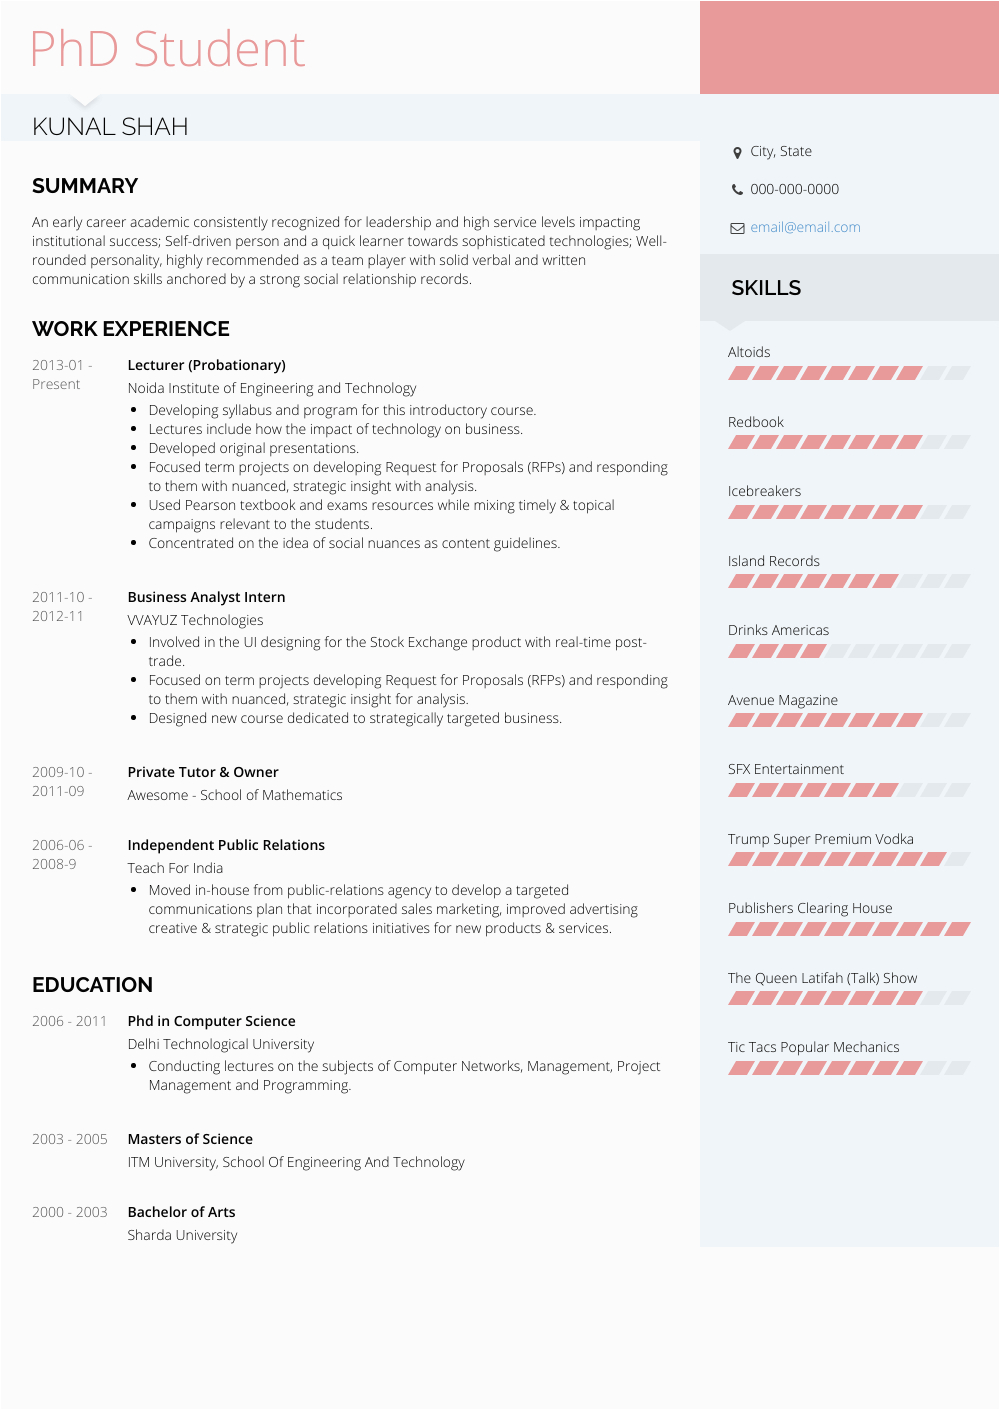 Sample Resume for Phd Application Ic Design Phd Student Resume Samples and Templates